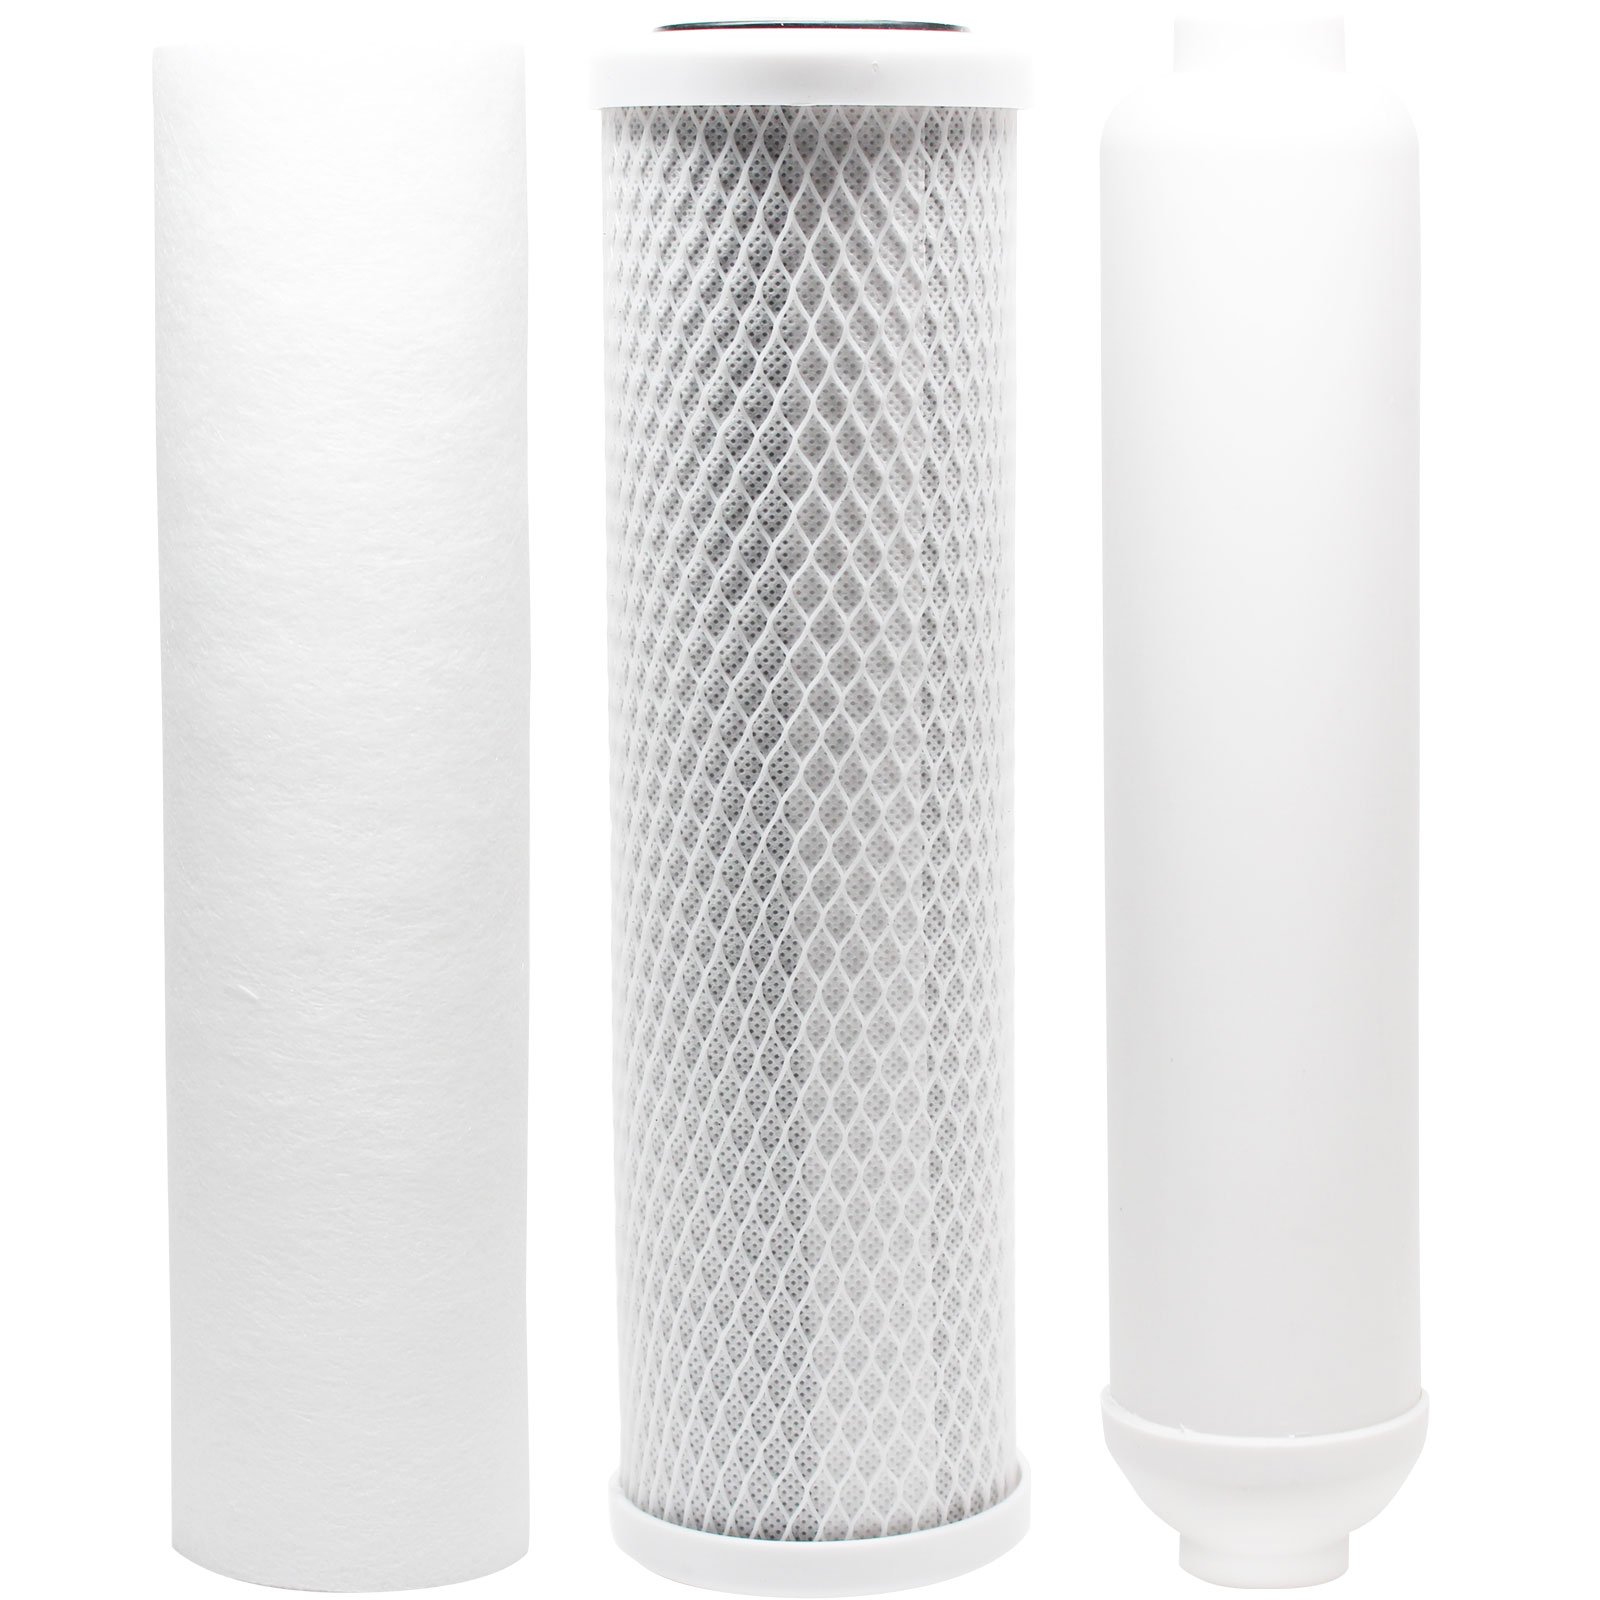 Replacement Filter Kit Compatible with Vertex PT 4.0 RO System - Includes Carbon Block Filter, PP Sediment Filter & Inline Filter Cartridge - Denali Pure Brand